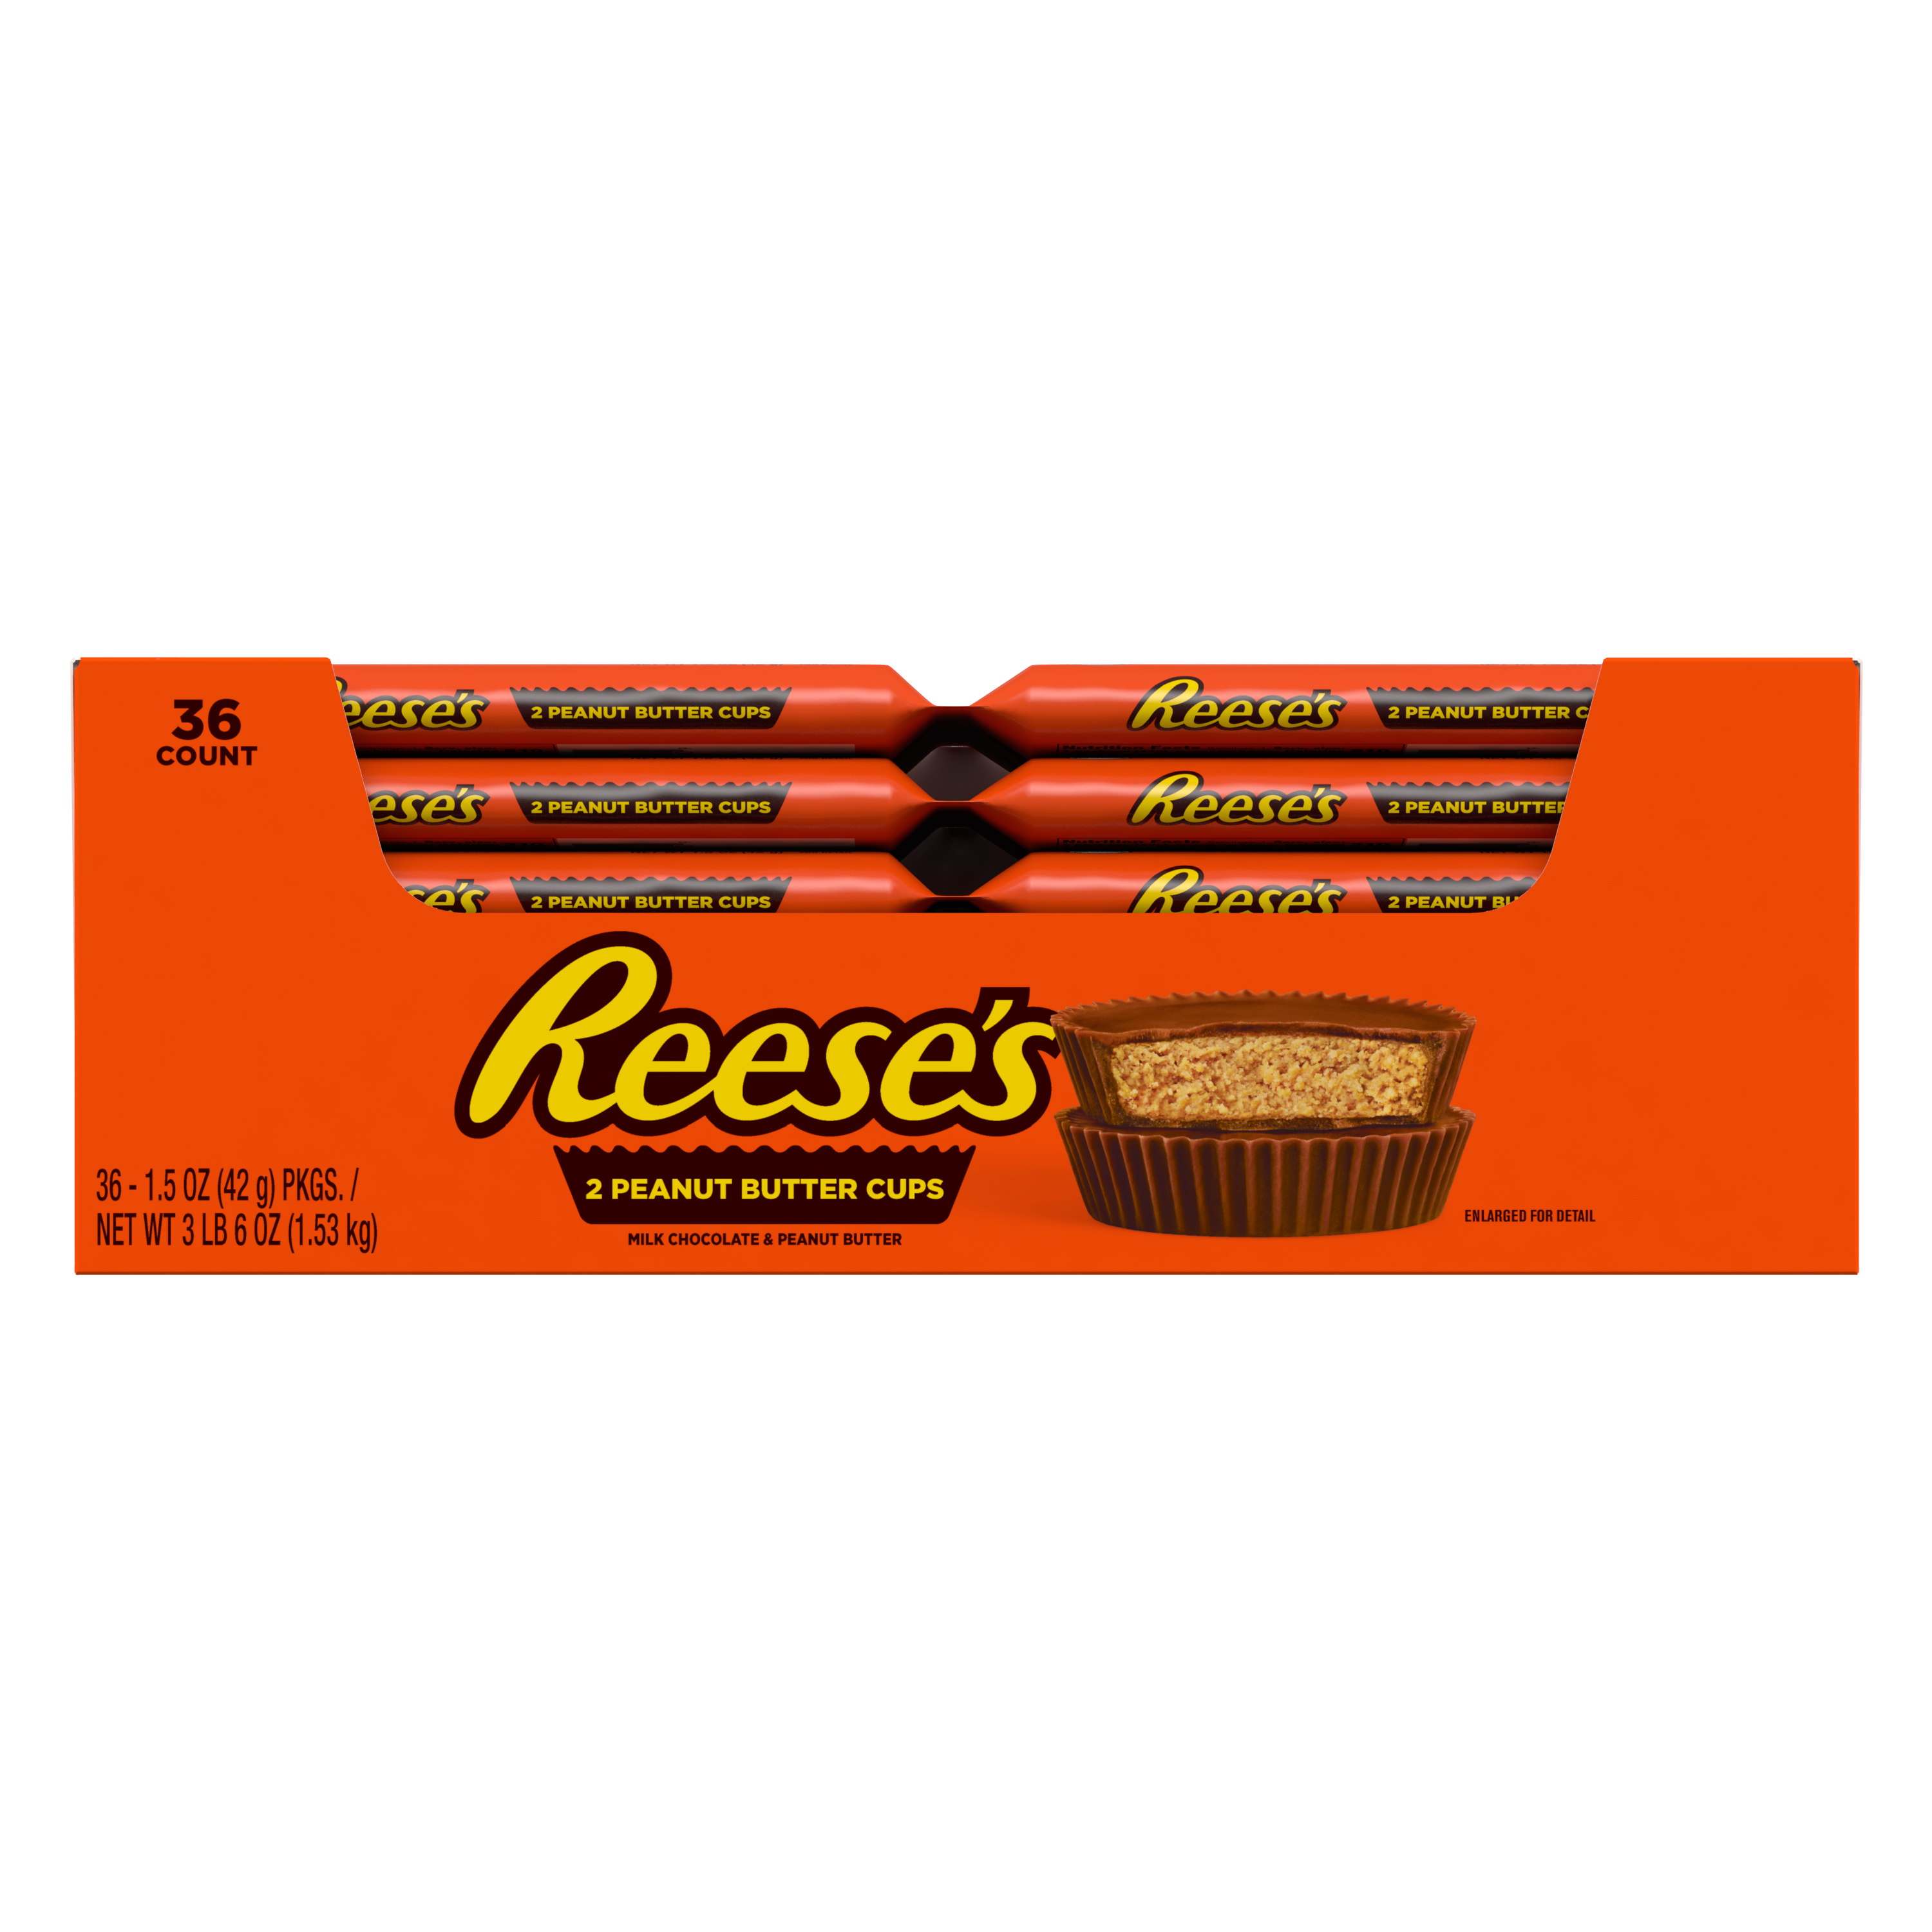 REESE'S Milk Chocolate Peanut Butter Cups, 1.5 oz box, 36 count - Front of Package